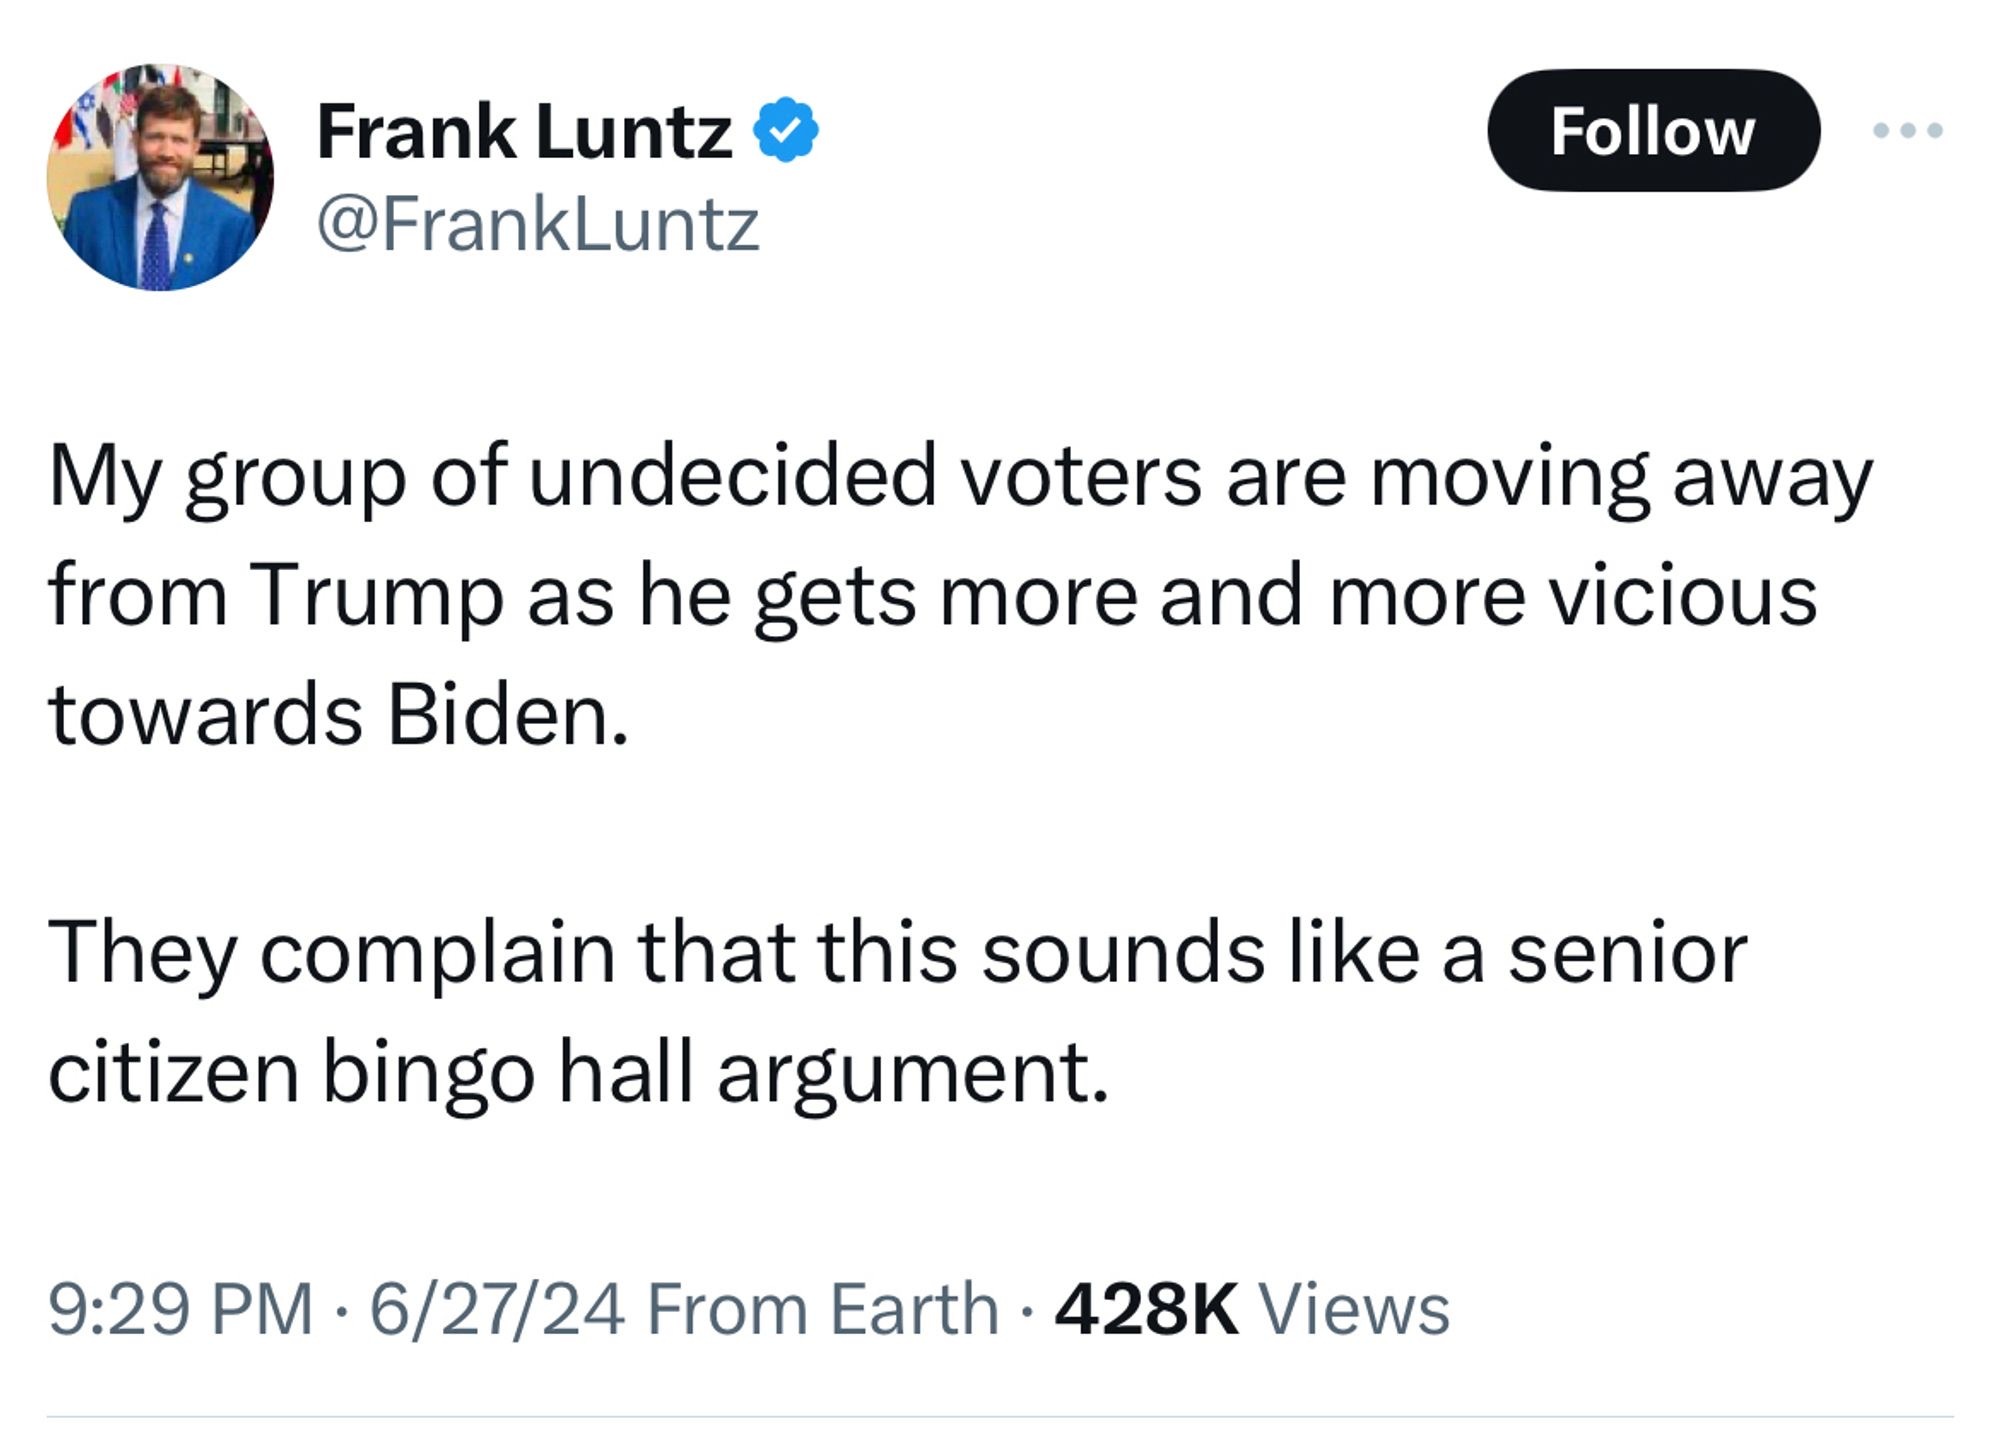 A Tweet from Frank Luntz: “My group of undecided voters are moving away from Trump as he gets more and more vicious towards Biden. They complain that this sounds like a senior citizen bingo hall argument.”